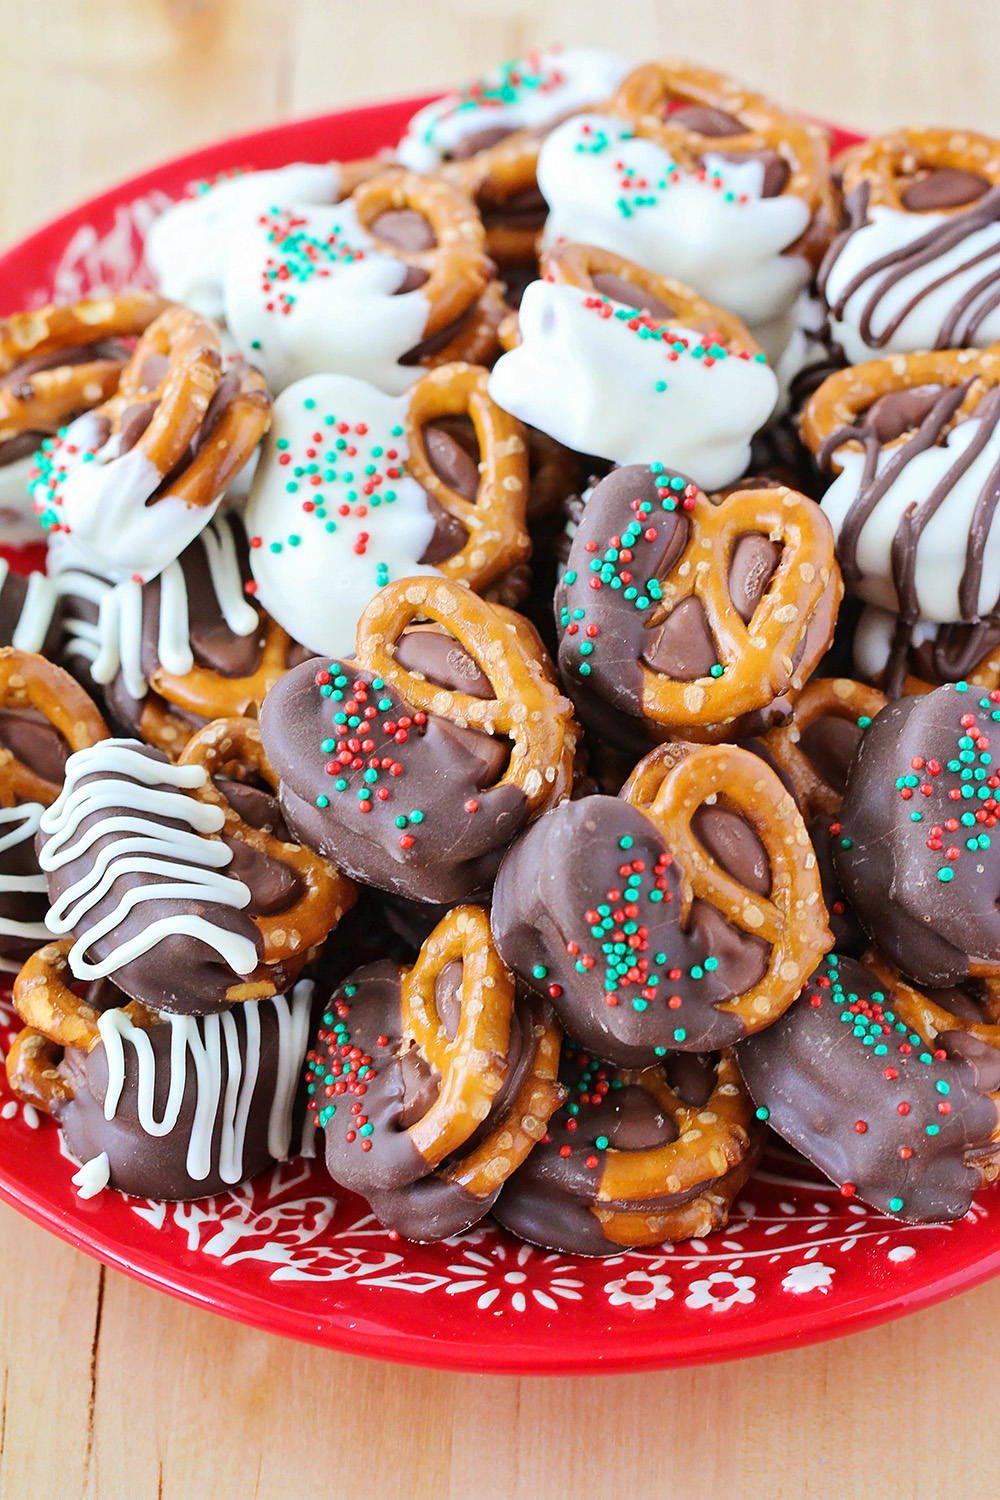 These Rolo pretzel sandwiches are so easy to make and so delicious too! Perfect for holiday snacking or gifting!